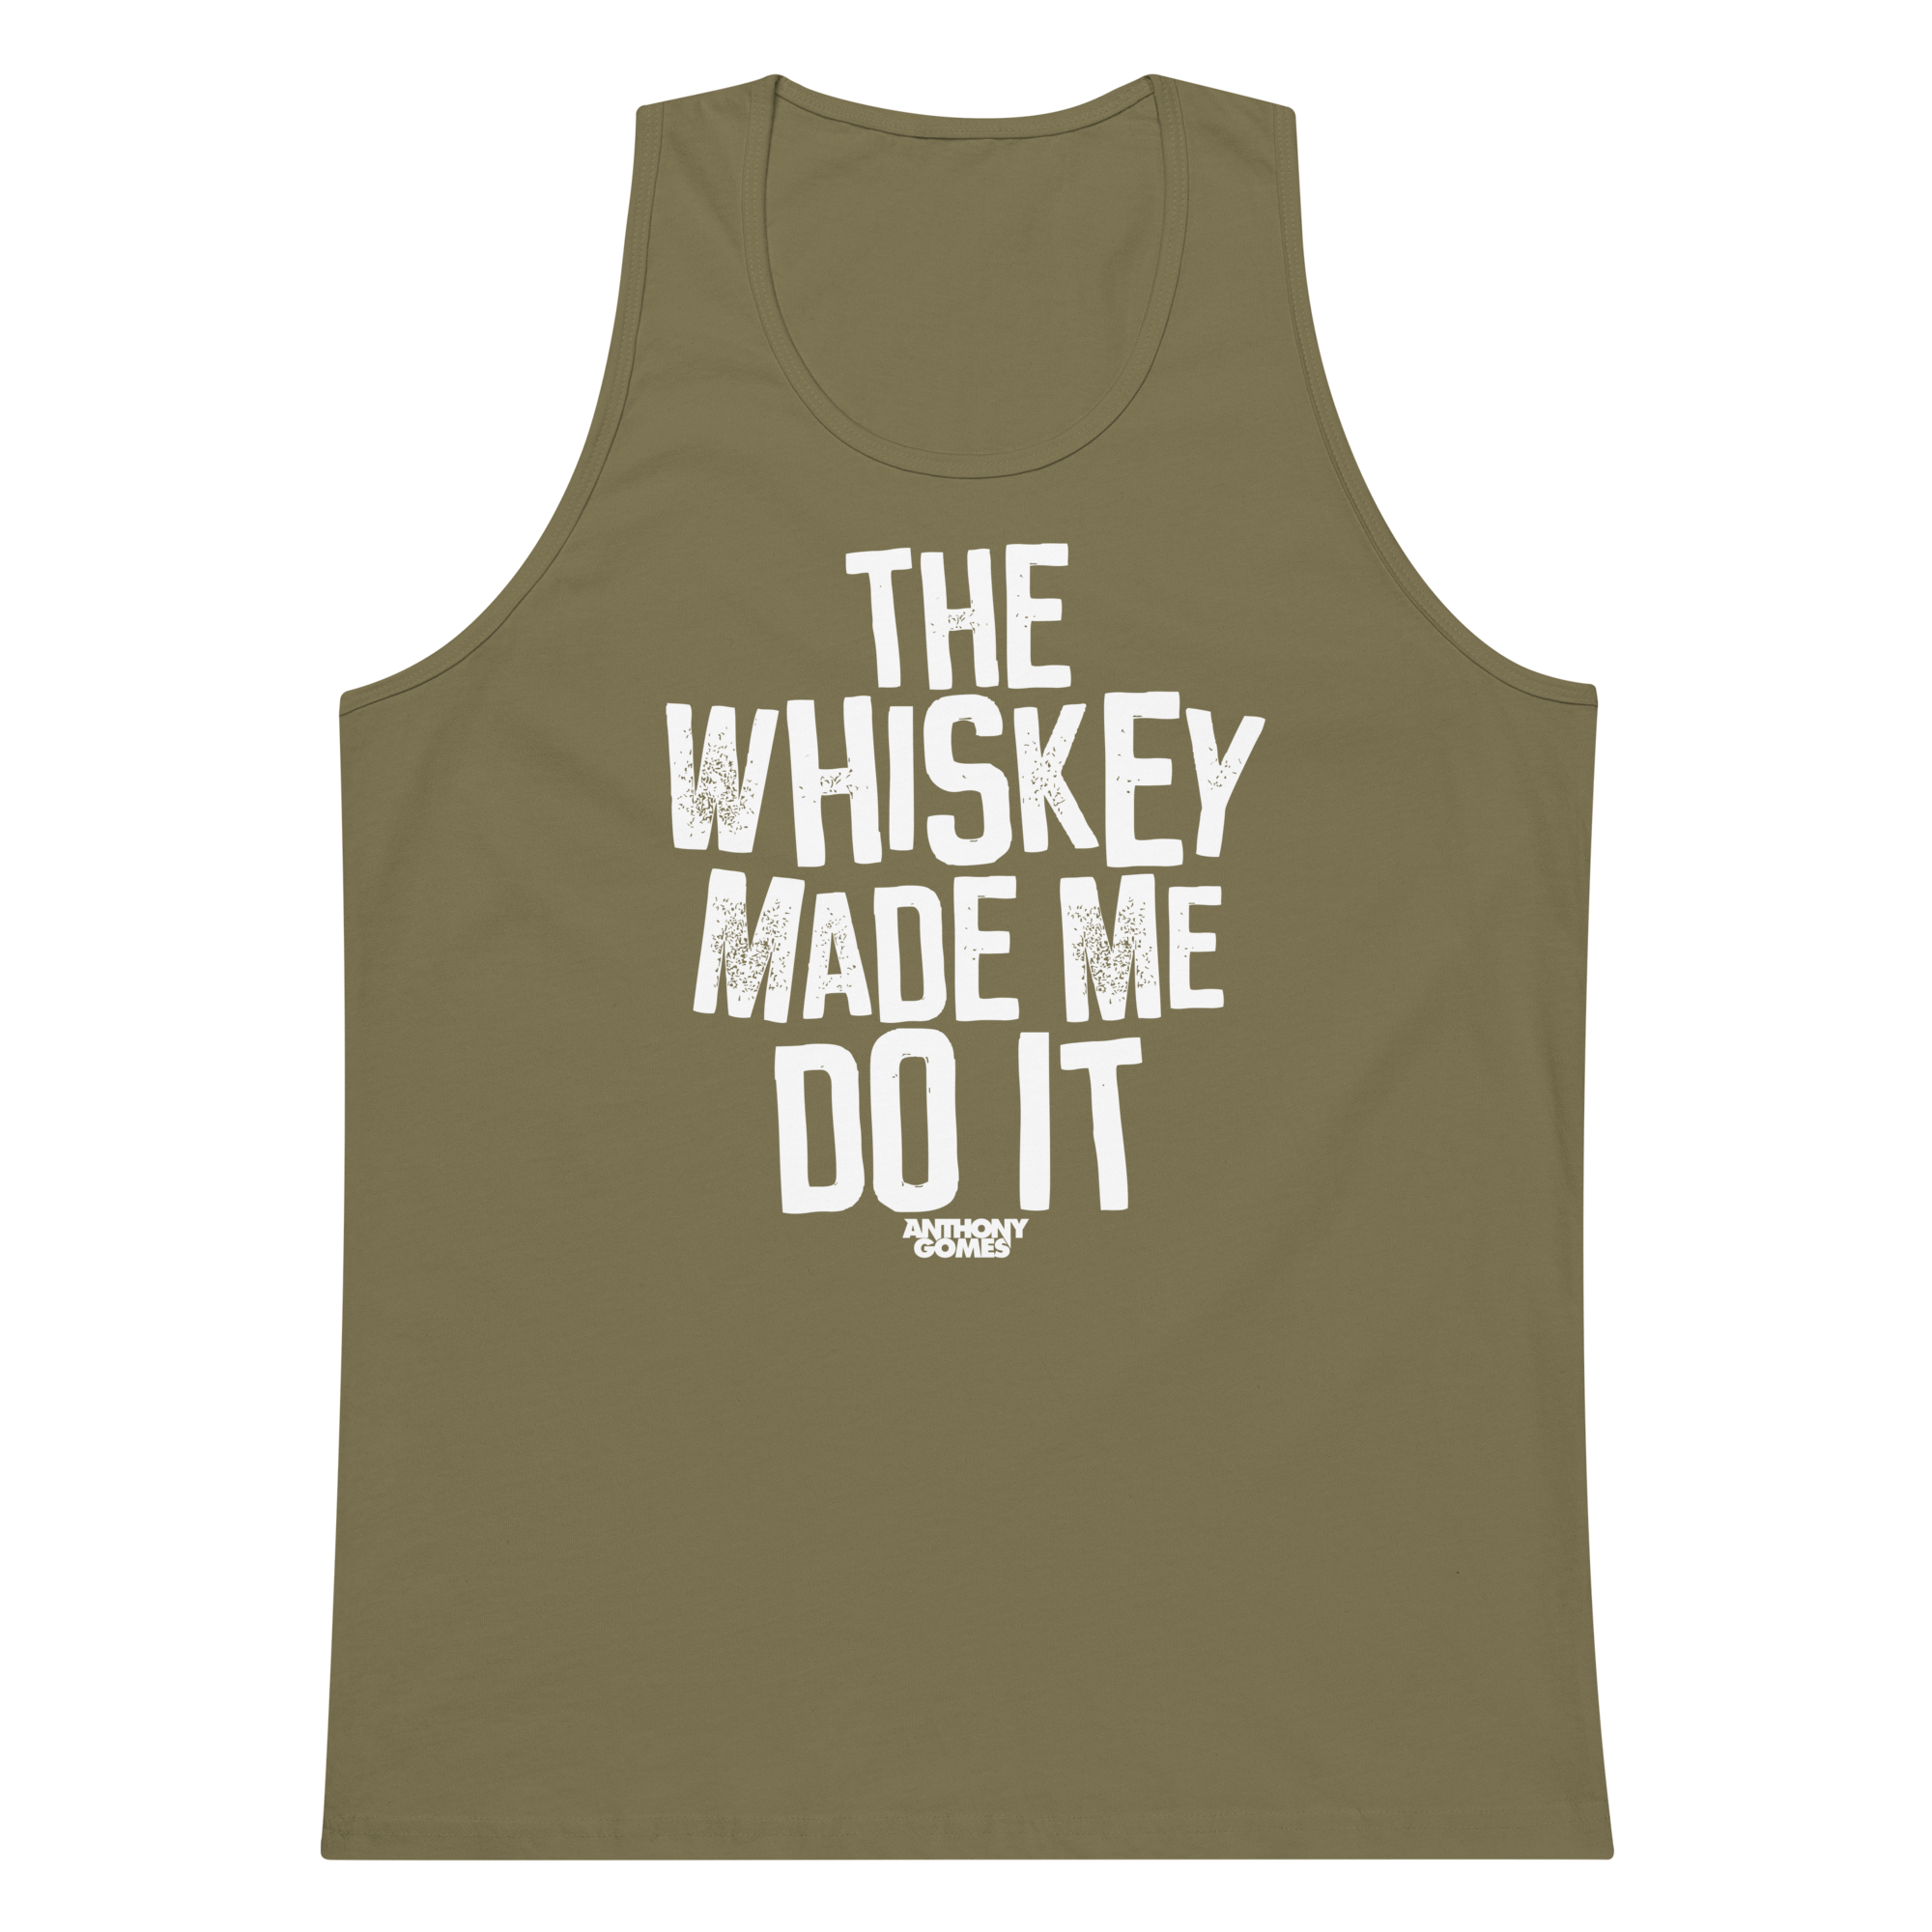 Men’s The Whiskey Tap Top - Available in 7 Colors (S-3XL)